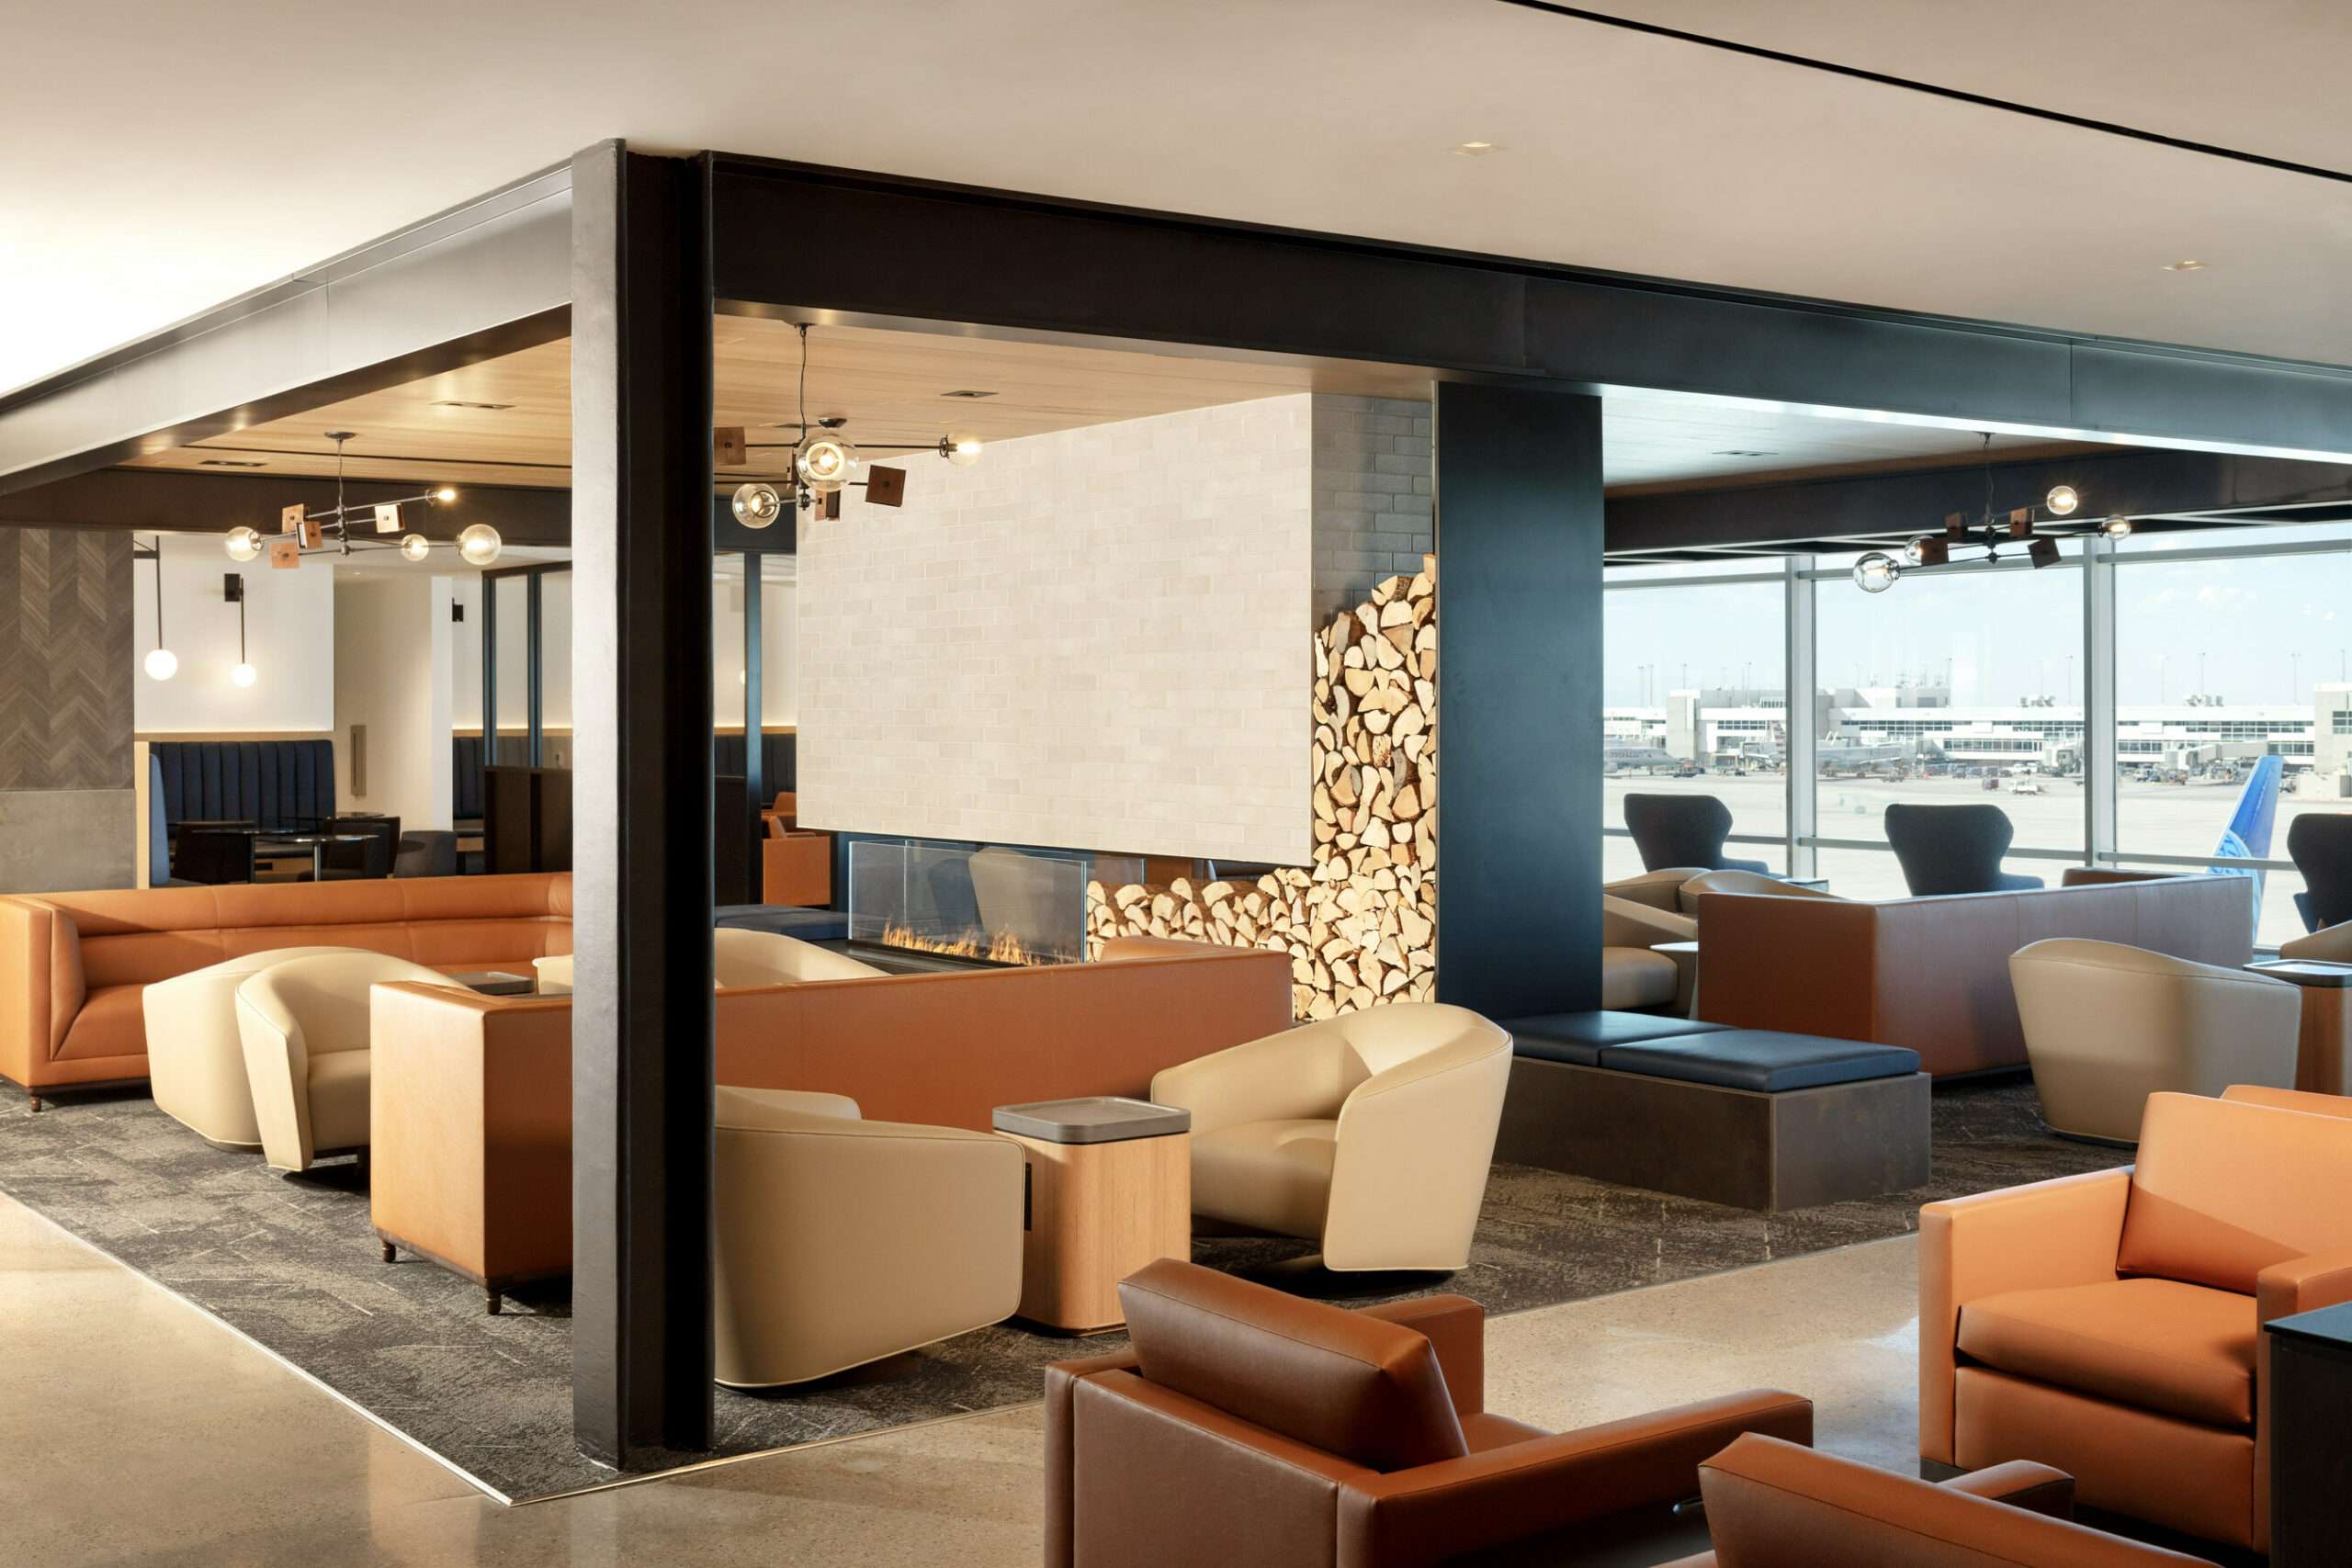 Interior view of United Airlines United Club in Denver.